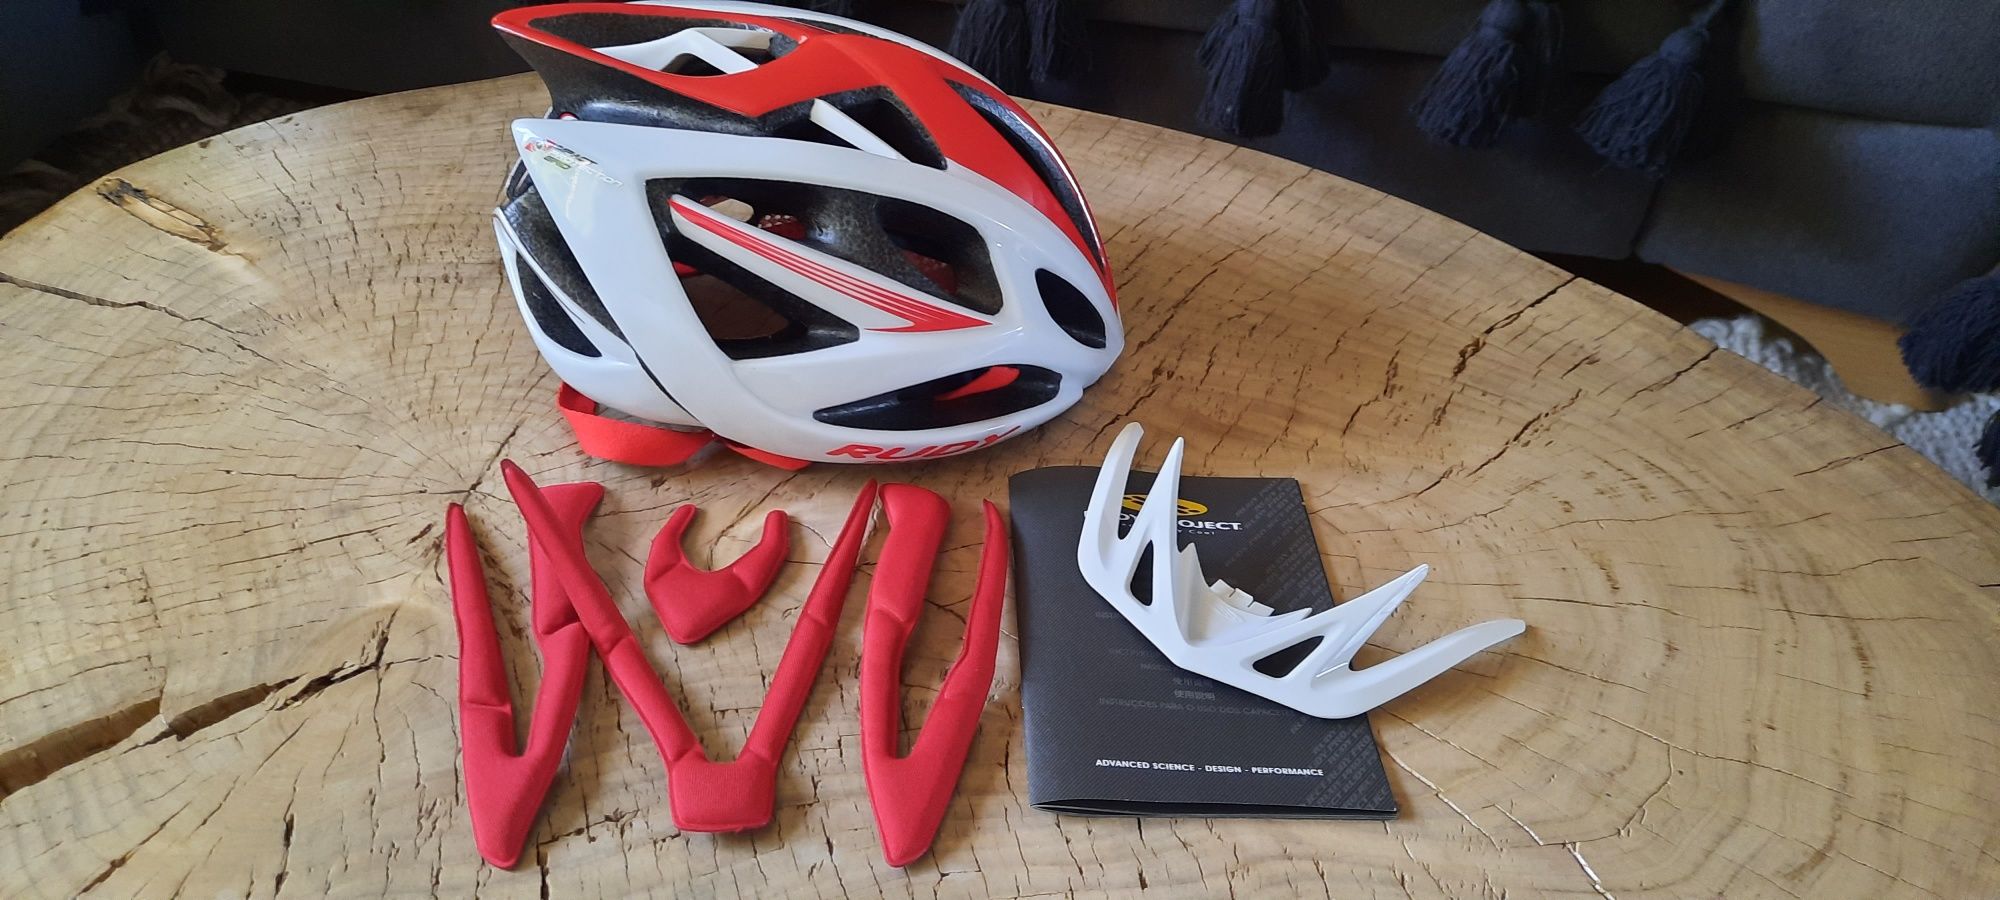 Kask rowerowy Rudy Project S-M